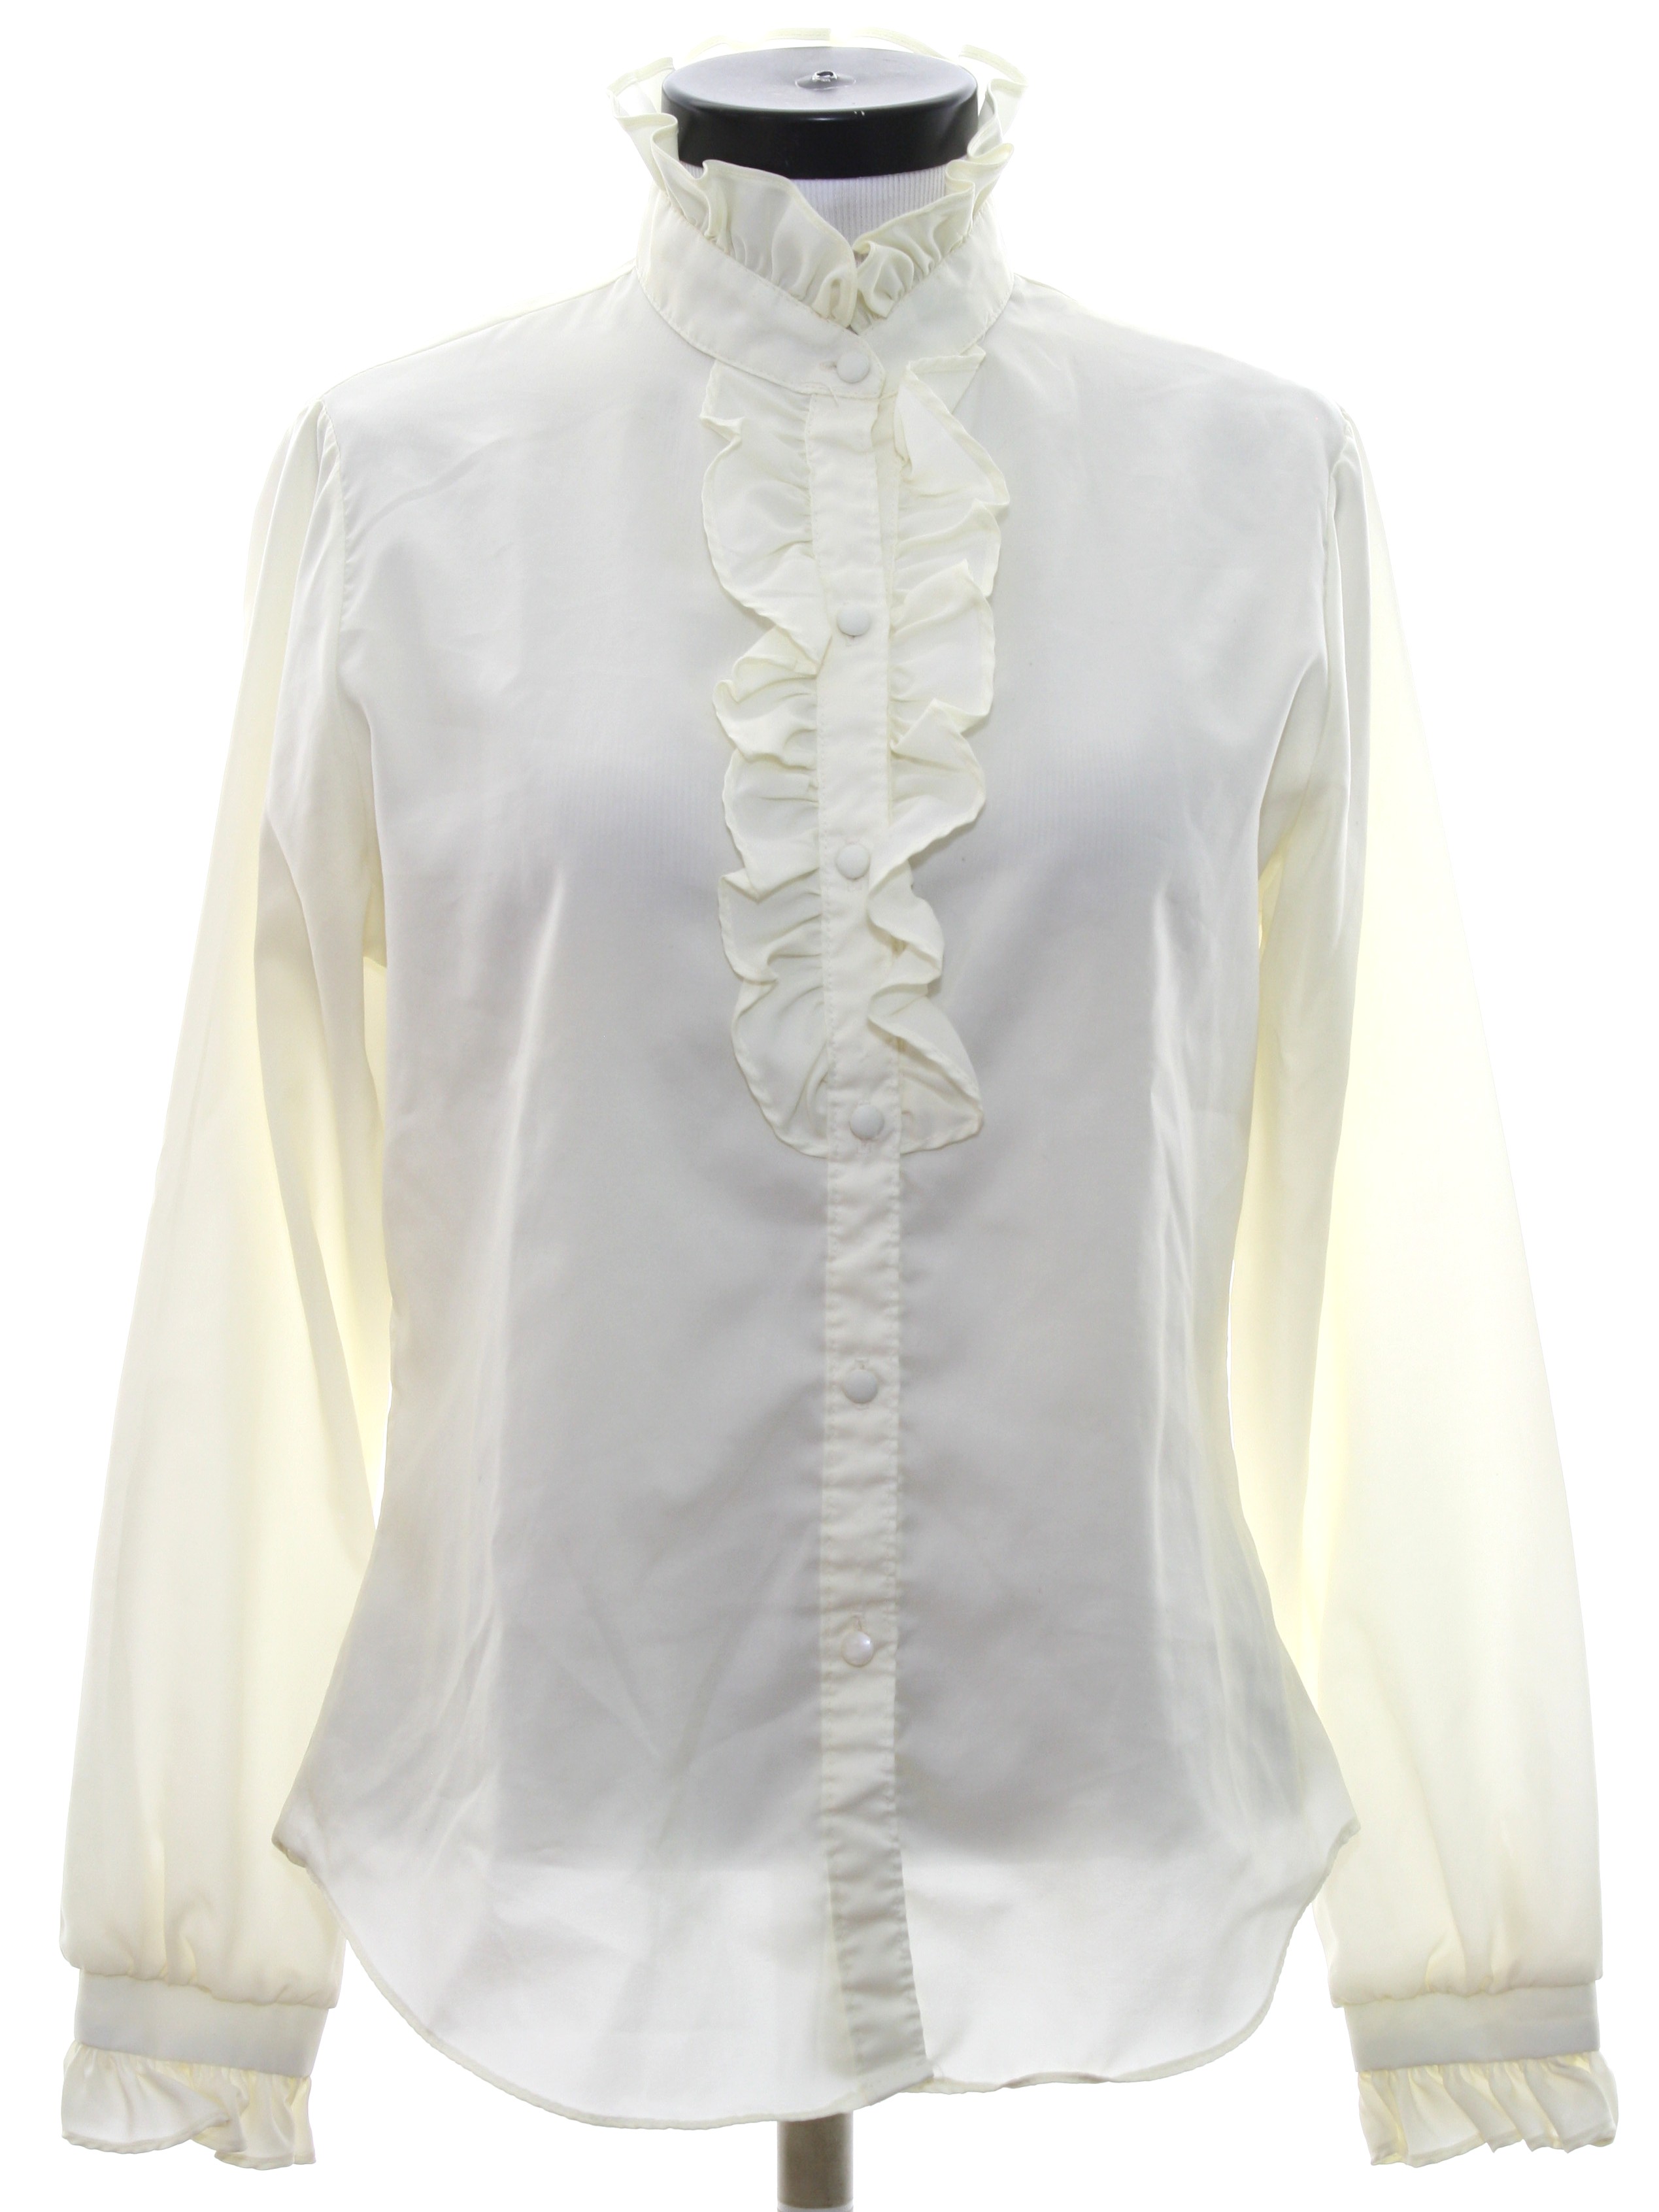 70's JC Penney Shirt: Early 80s -JC Penney- Womens ivory silky ...